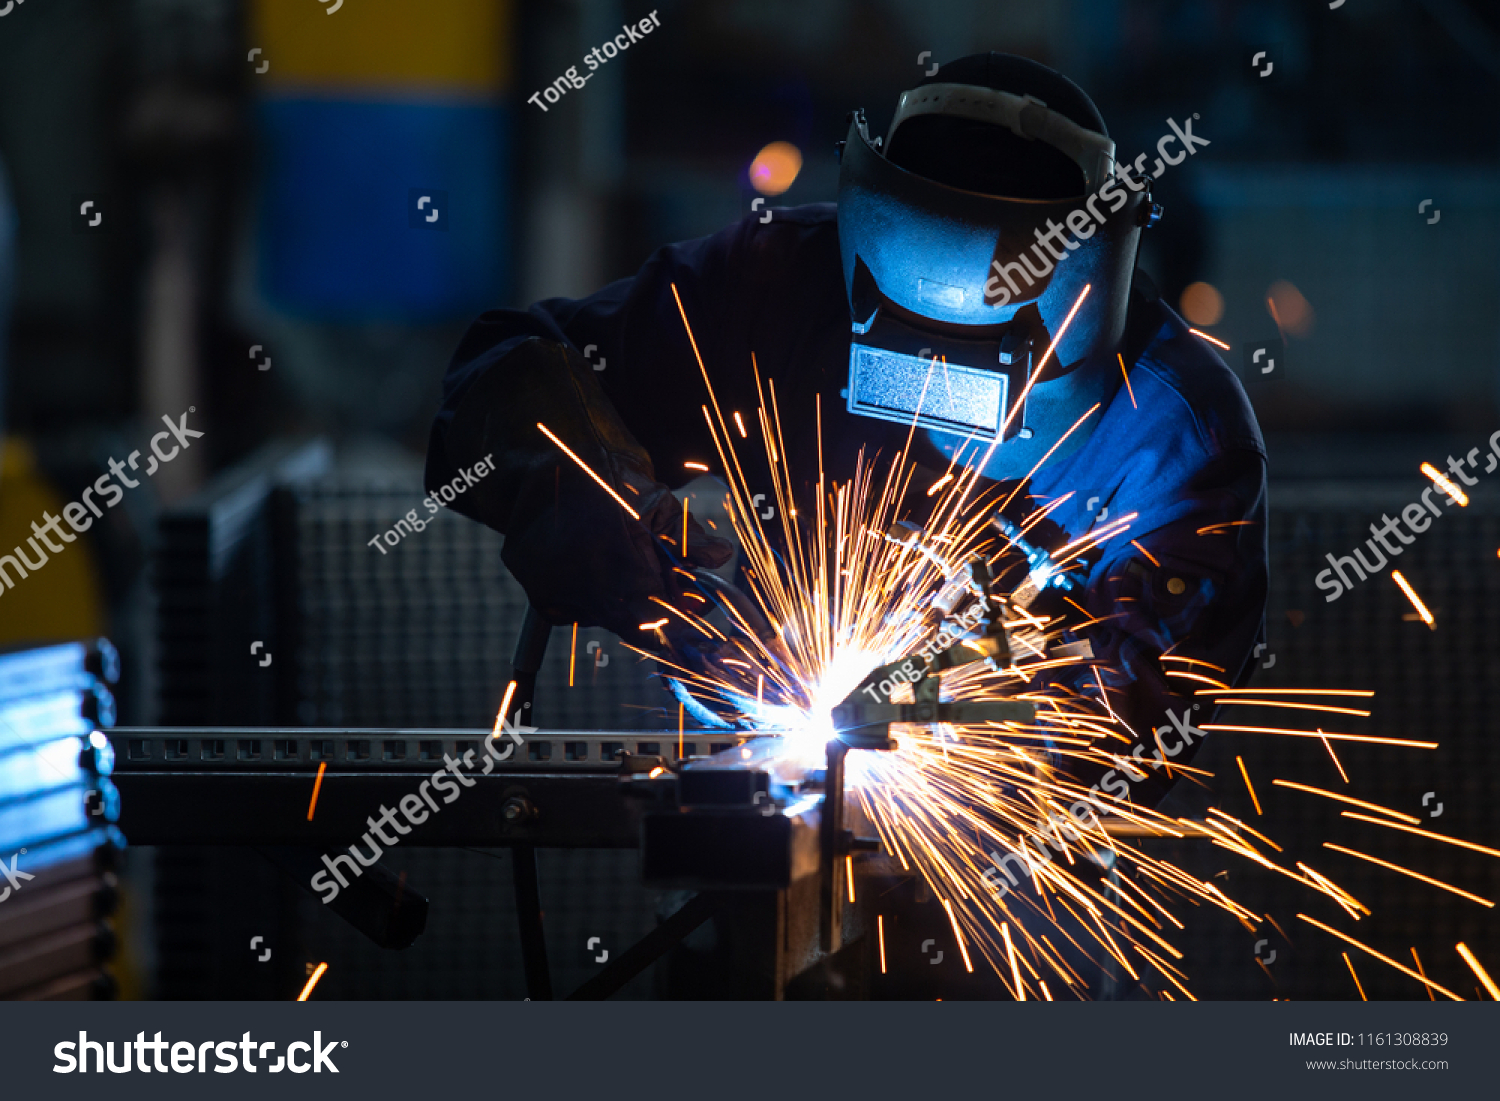 Workers wearing industrial uniforms and Welded Iron Mask at Steel welding plants, industrial safety first concept. #1161308839